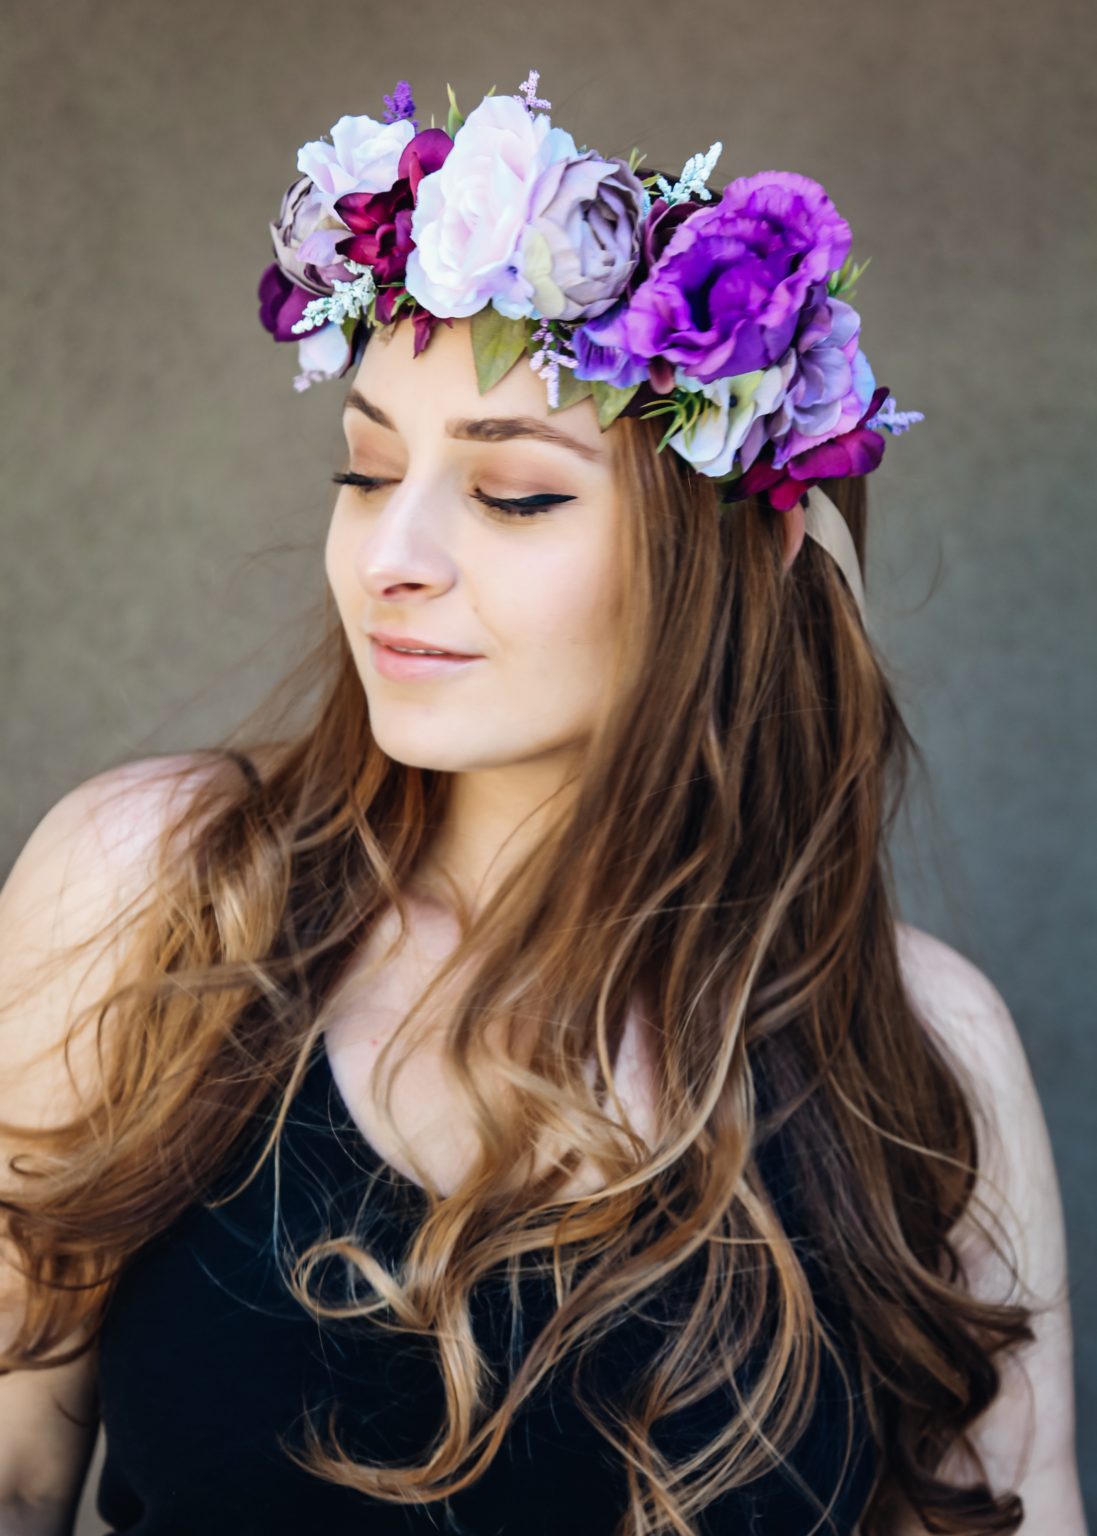 I Used To Make Flower Crowns... – rosie darch